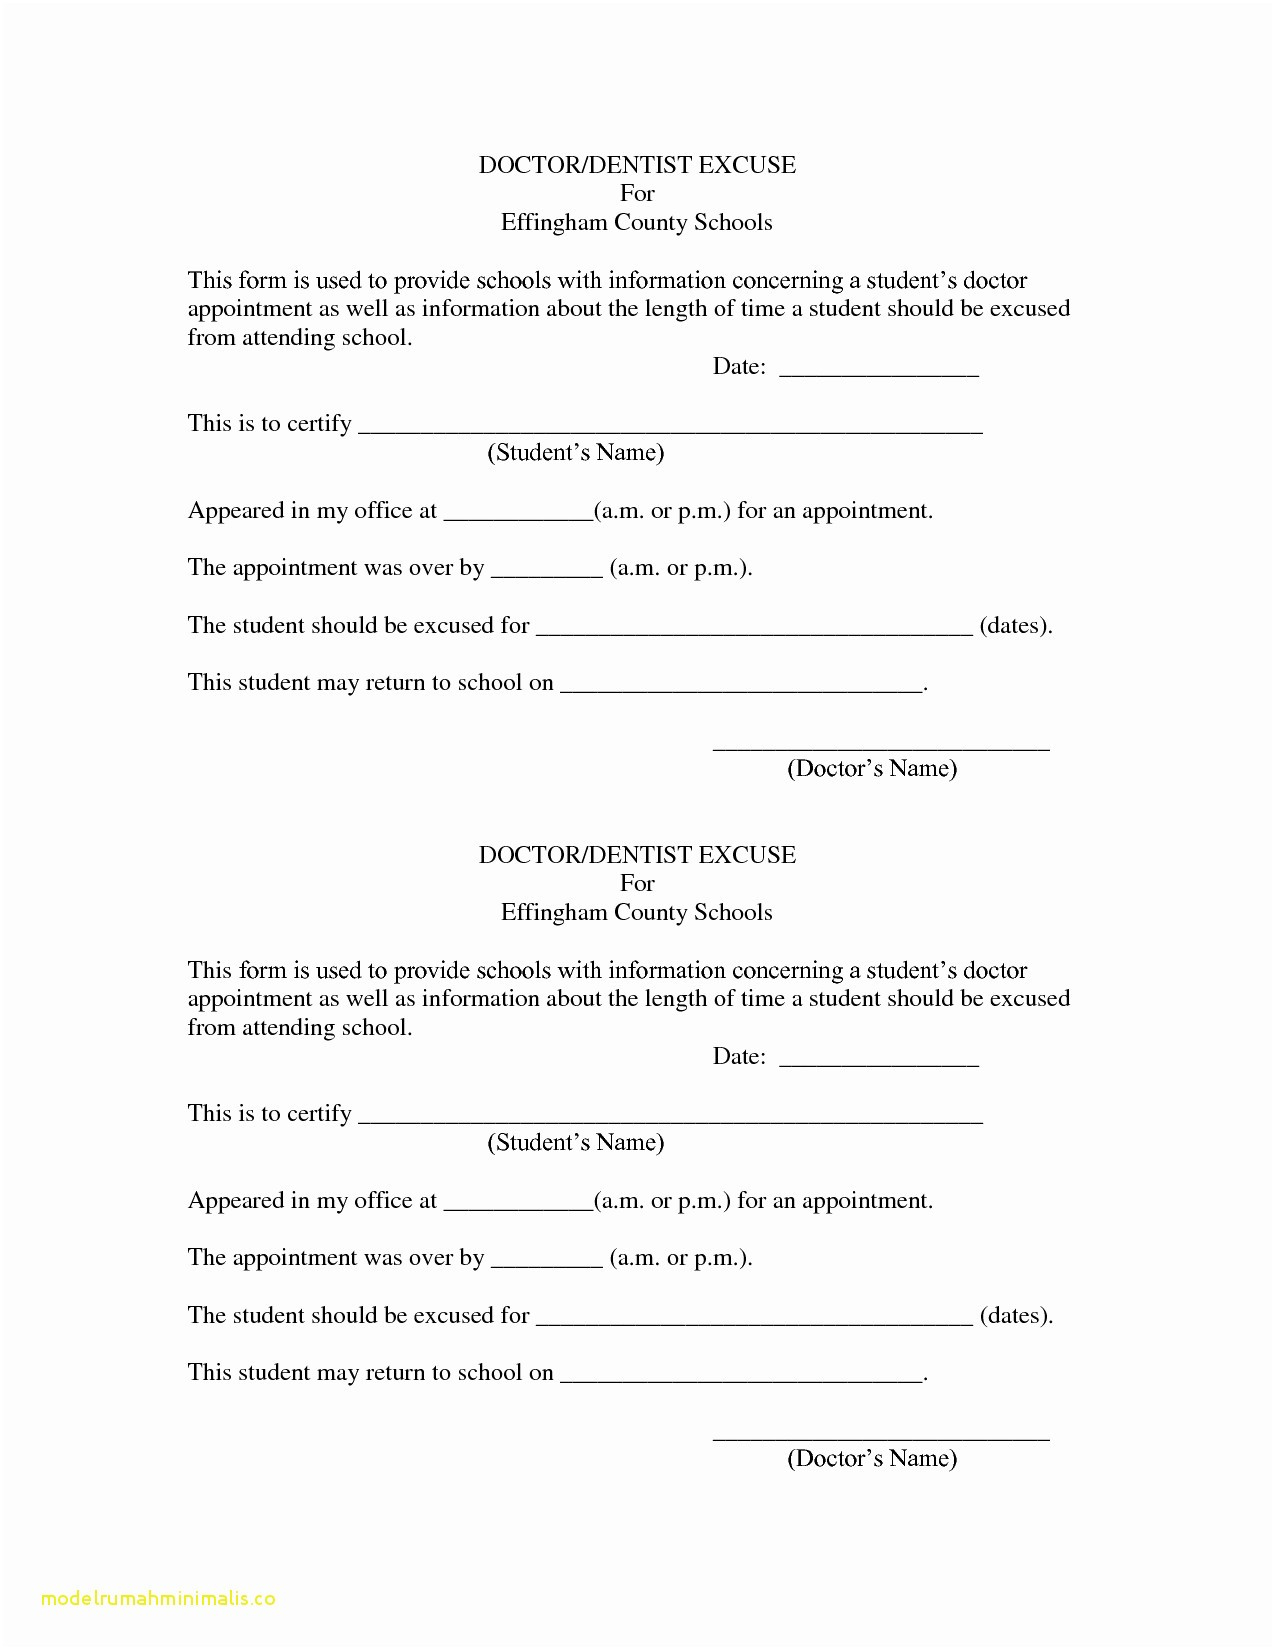 Dental Excuse Letter Template - Doctors Note Template top Result Doctors Excuse Templates for Work